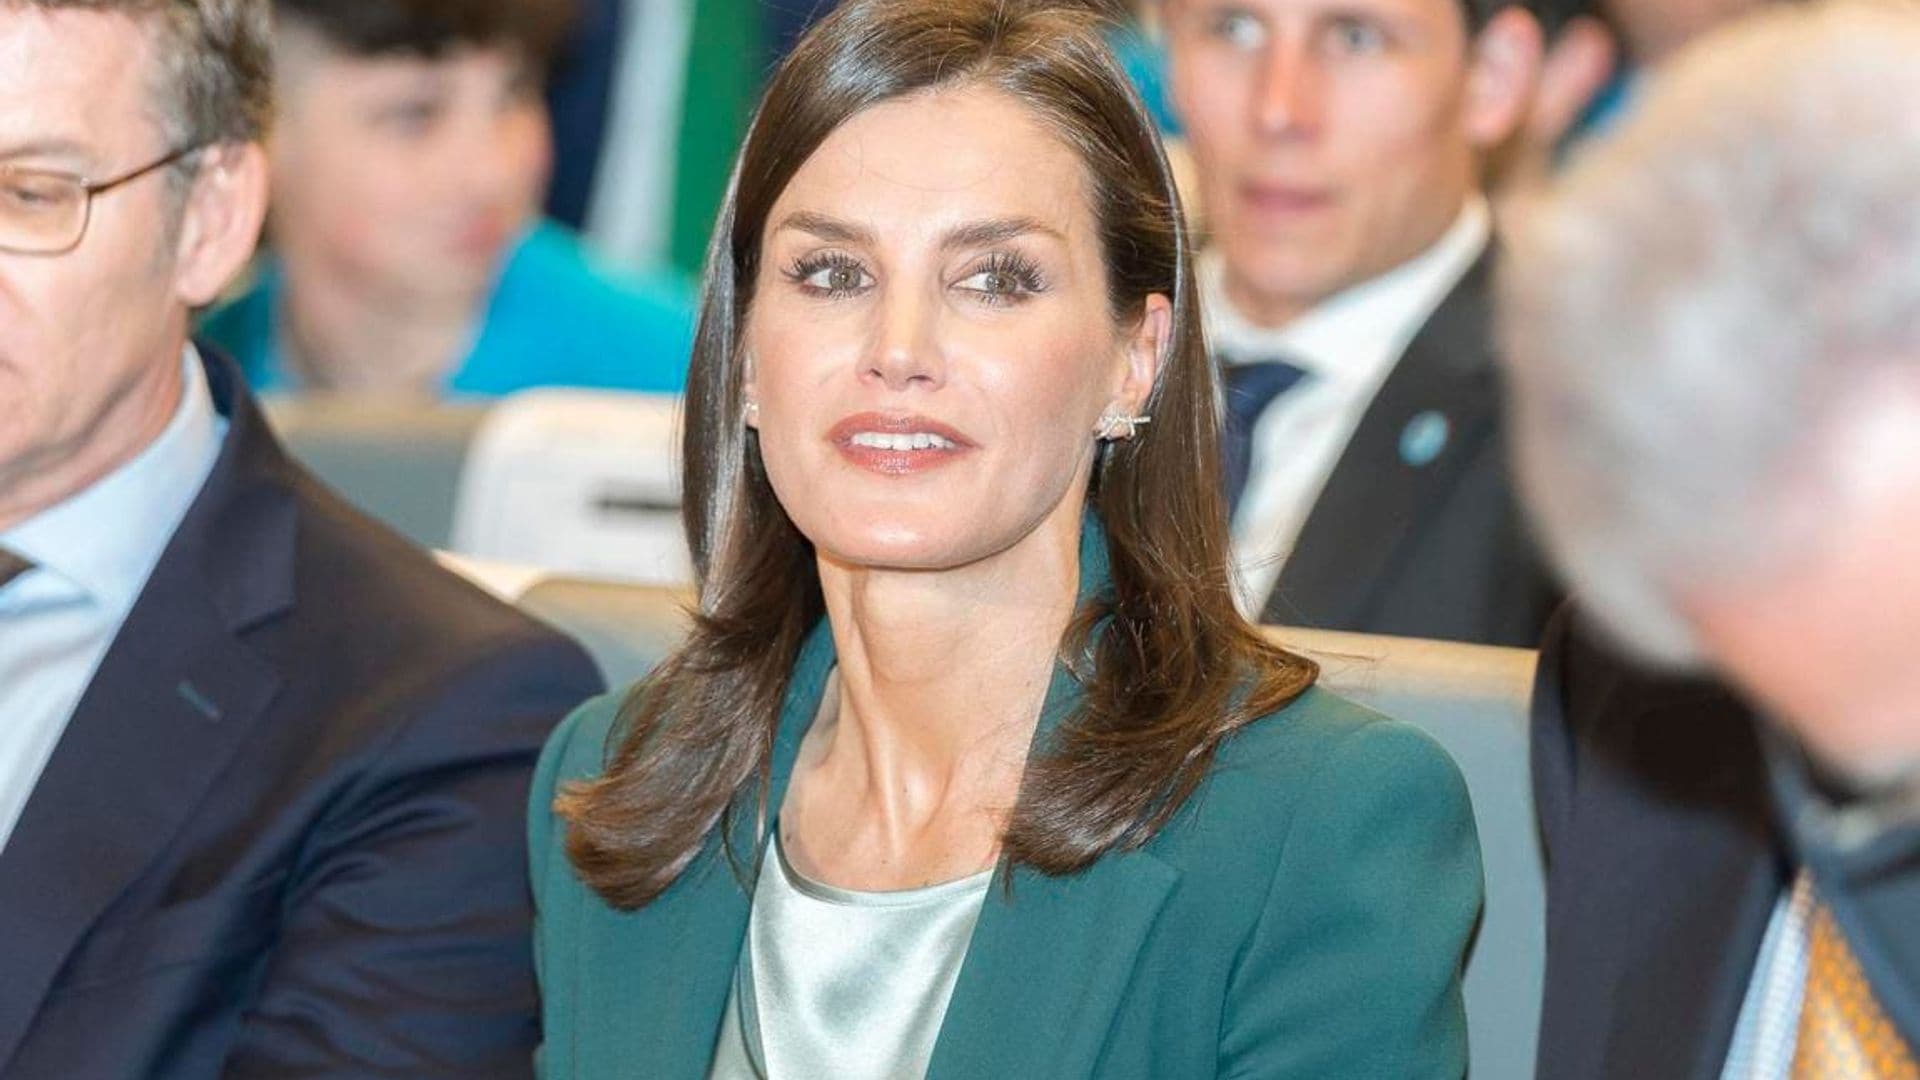 Queen Letizia just perfected St. Paddy’s Day style - take notes!